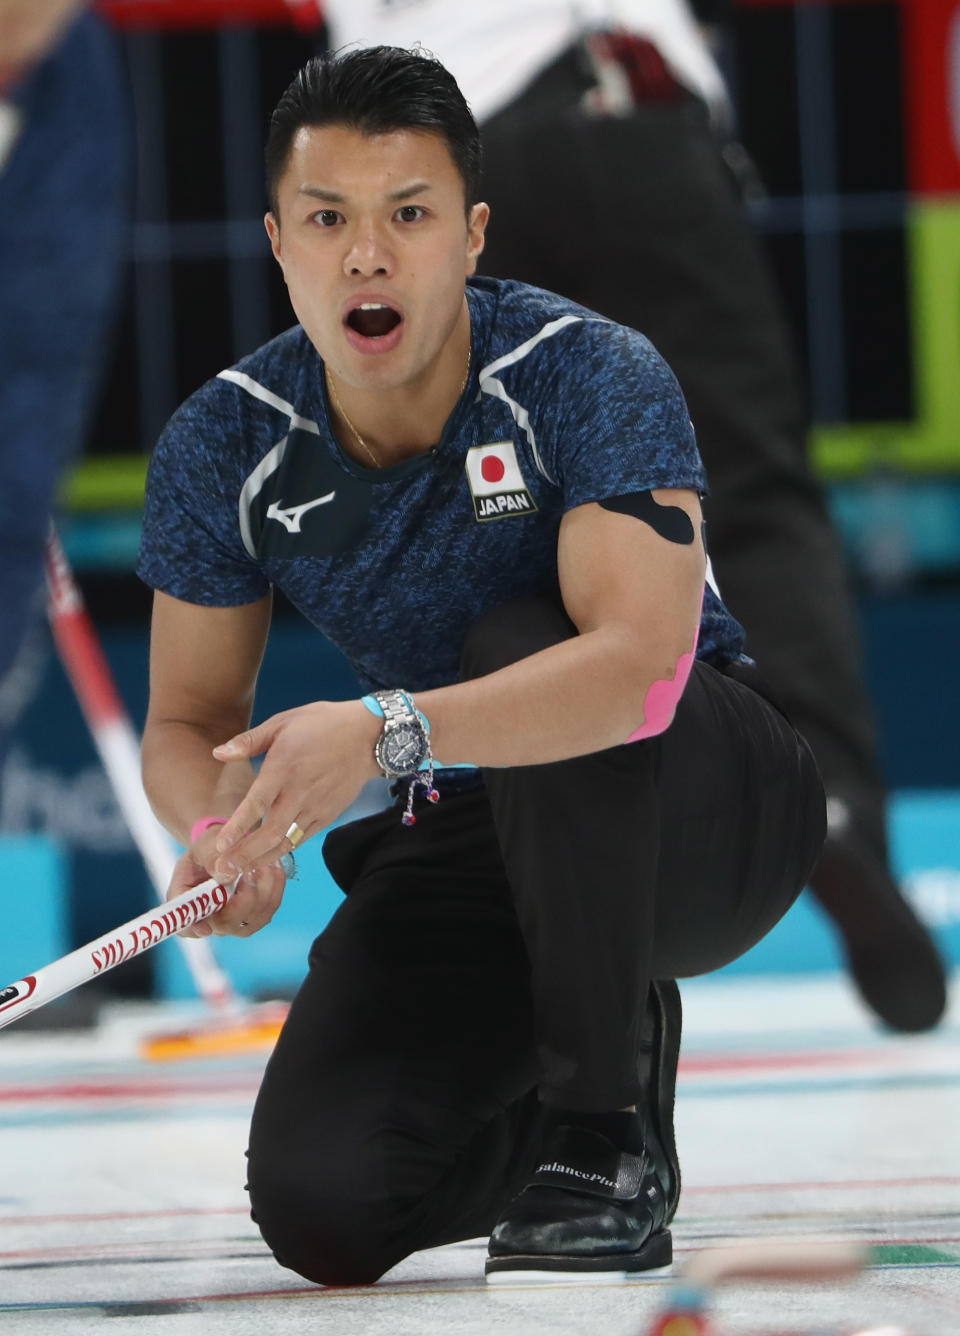 Olympic curlers: Fitter than you think